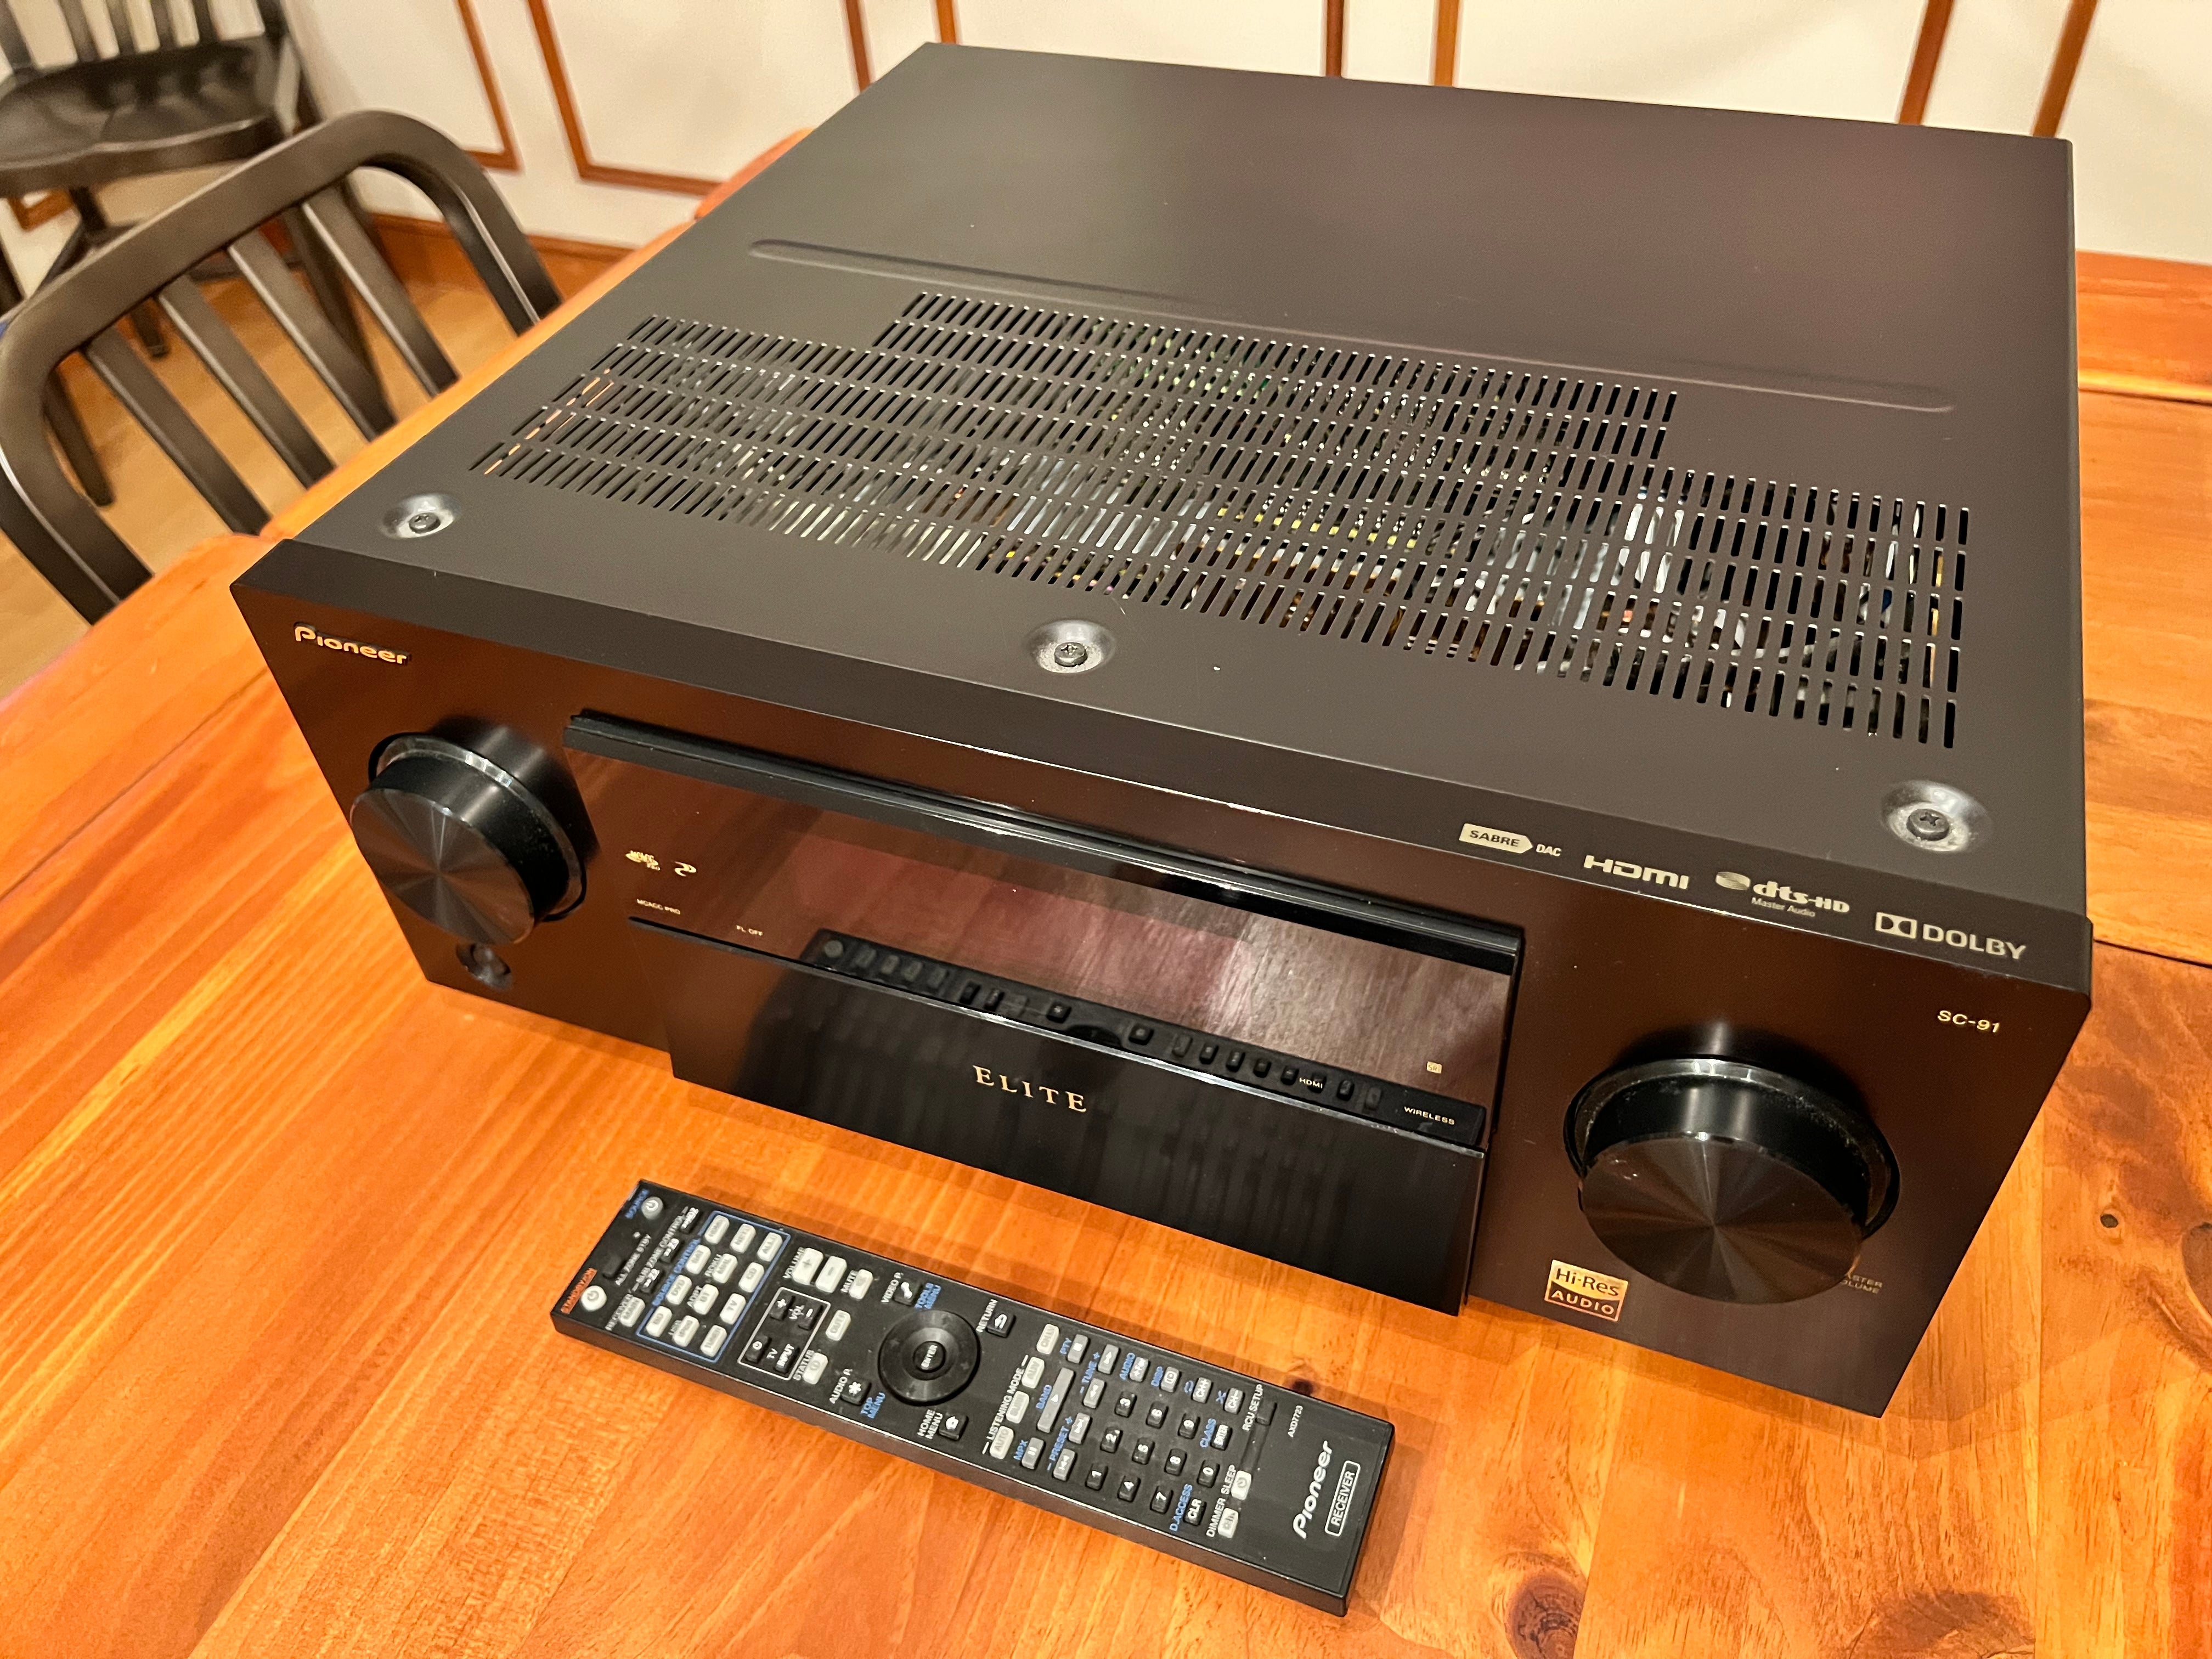 Pioneer SC-91 ELITE Home Theater Receiver - SOLD